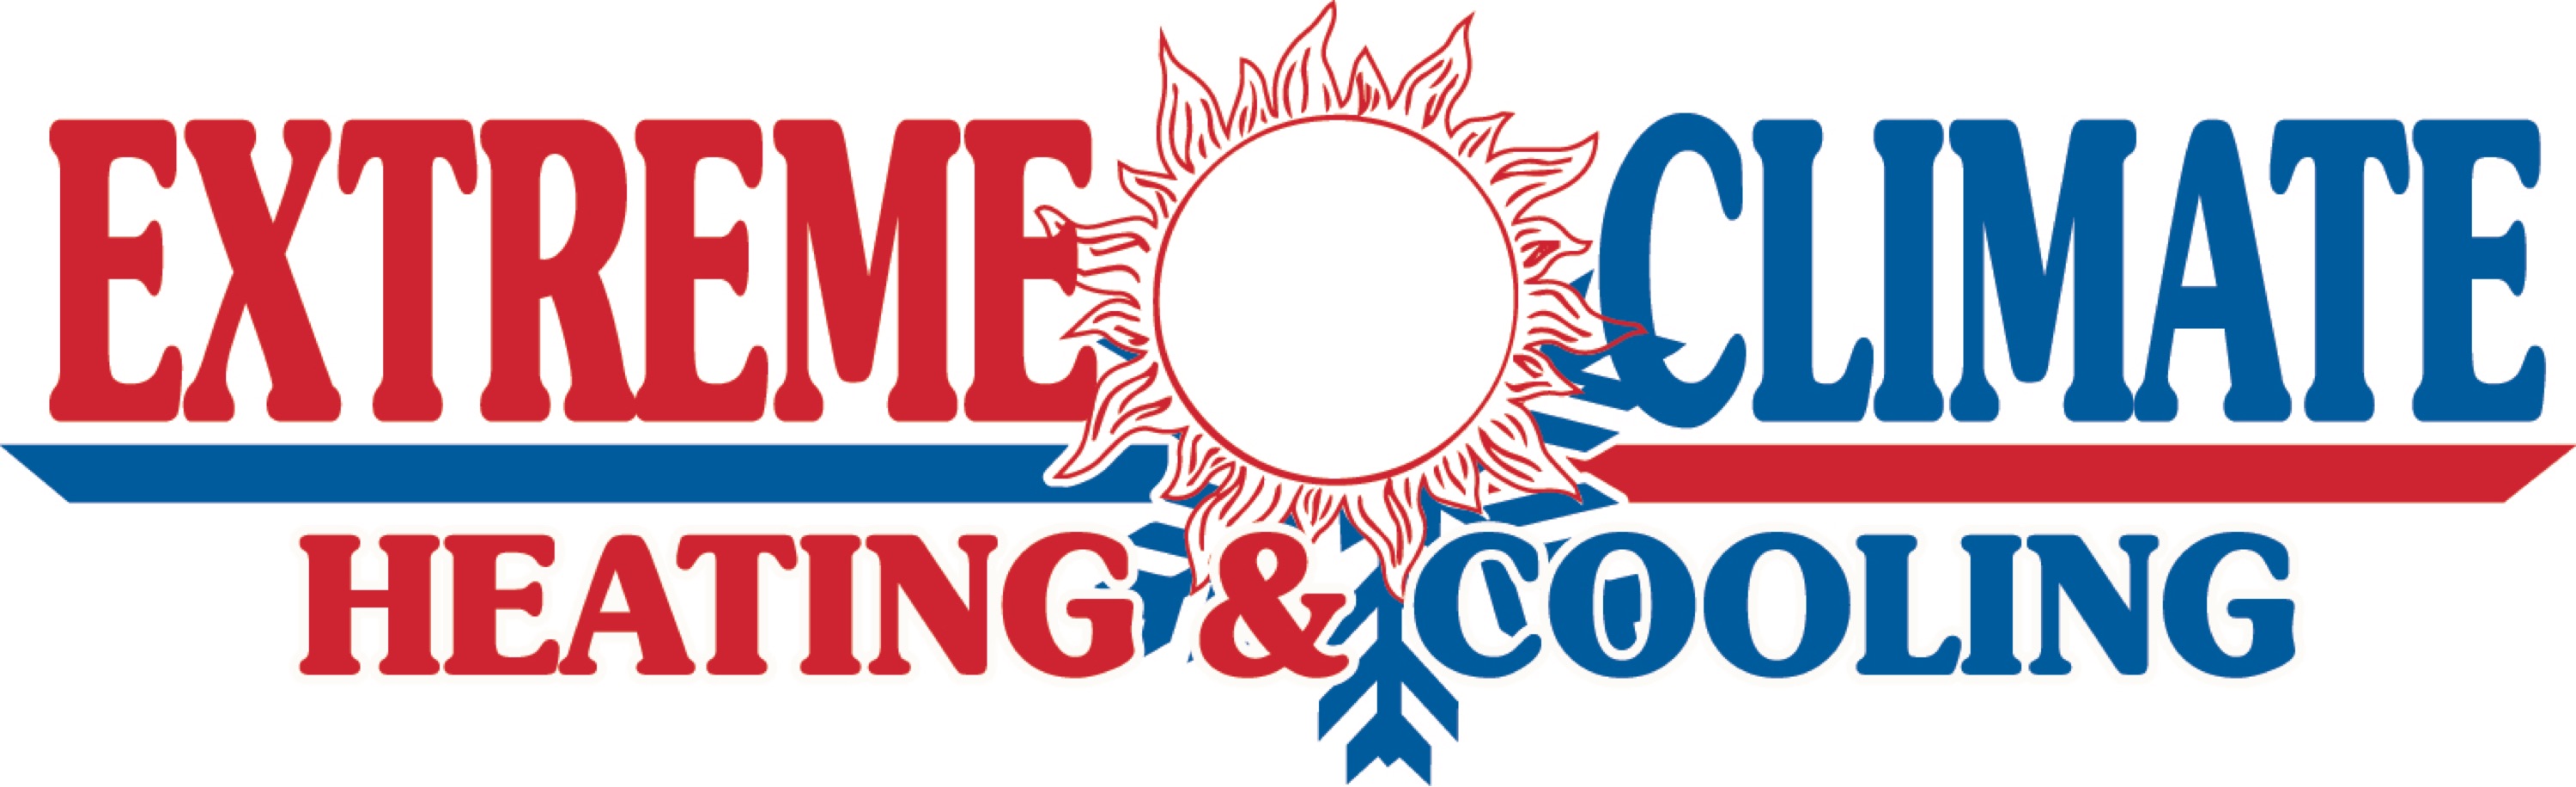 Extreme Climate Heating & Cooling Logo